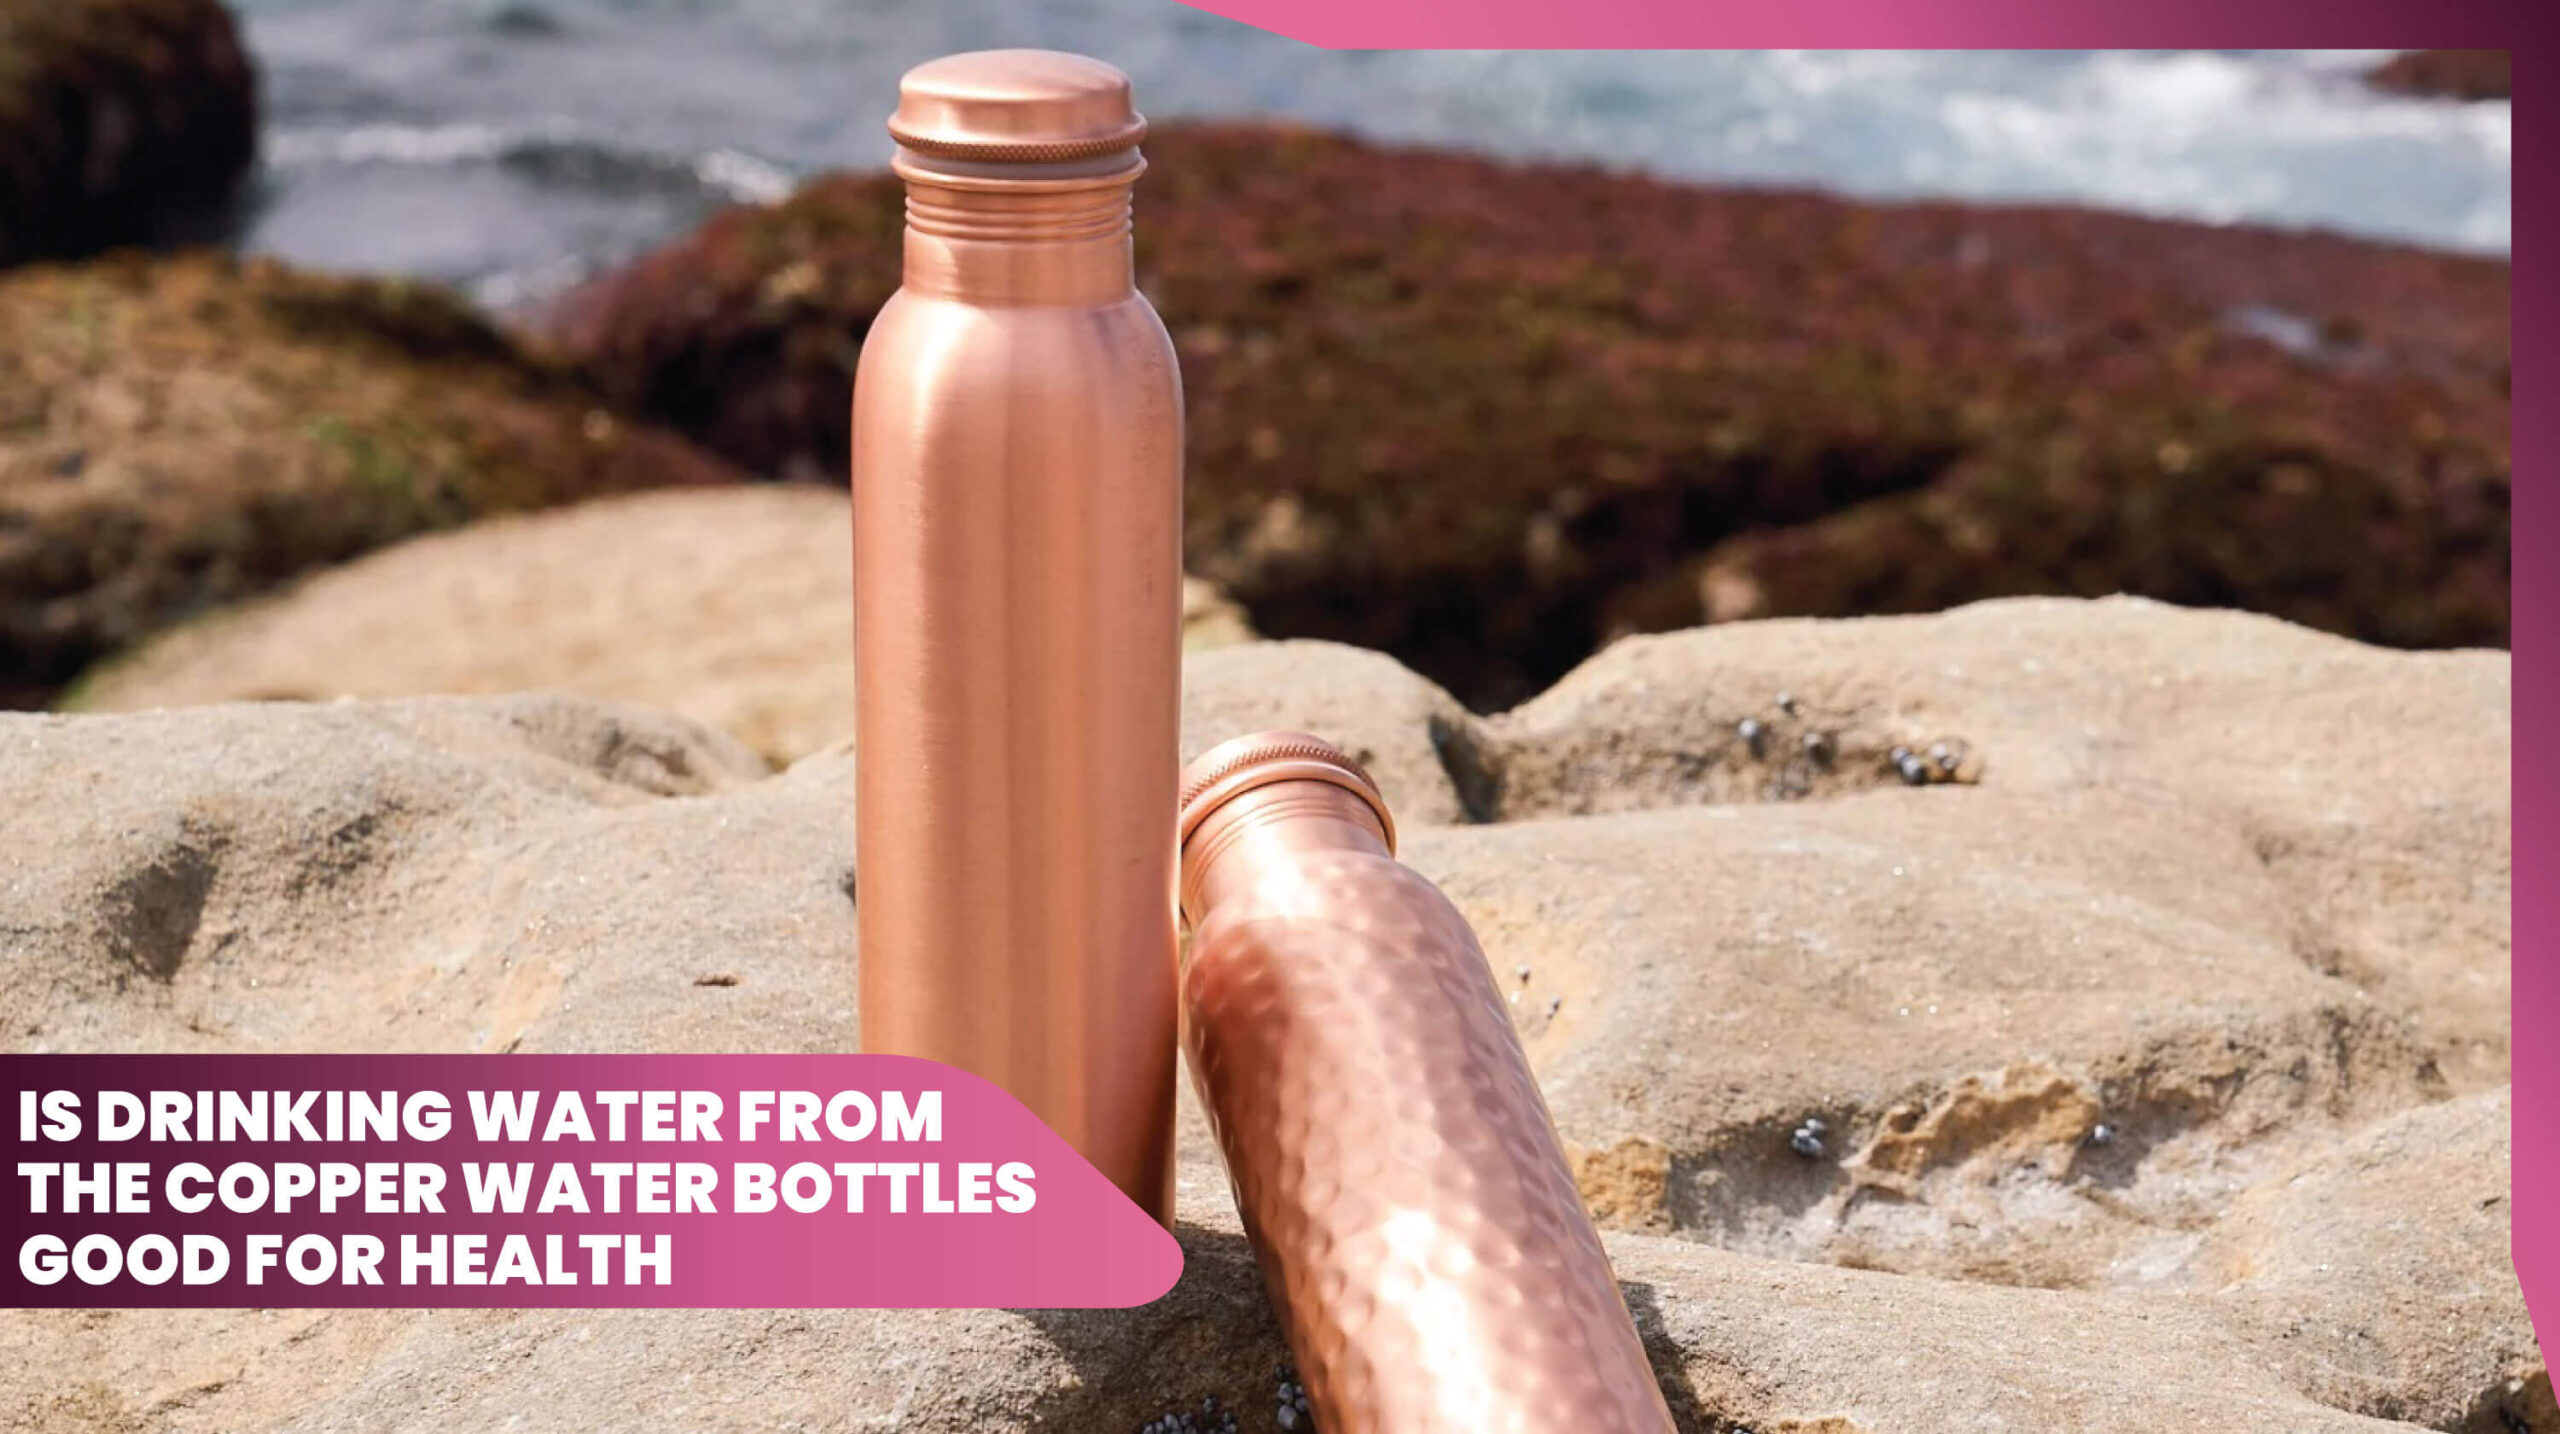 11Benefits of Drinking Water from Copper Bottles for Health